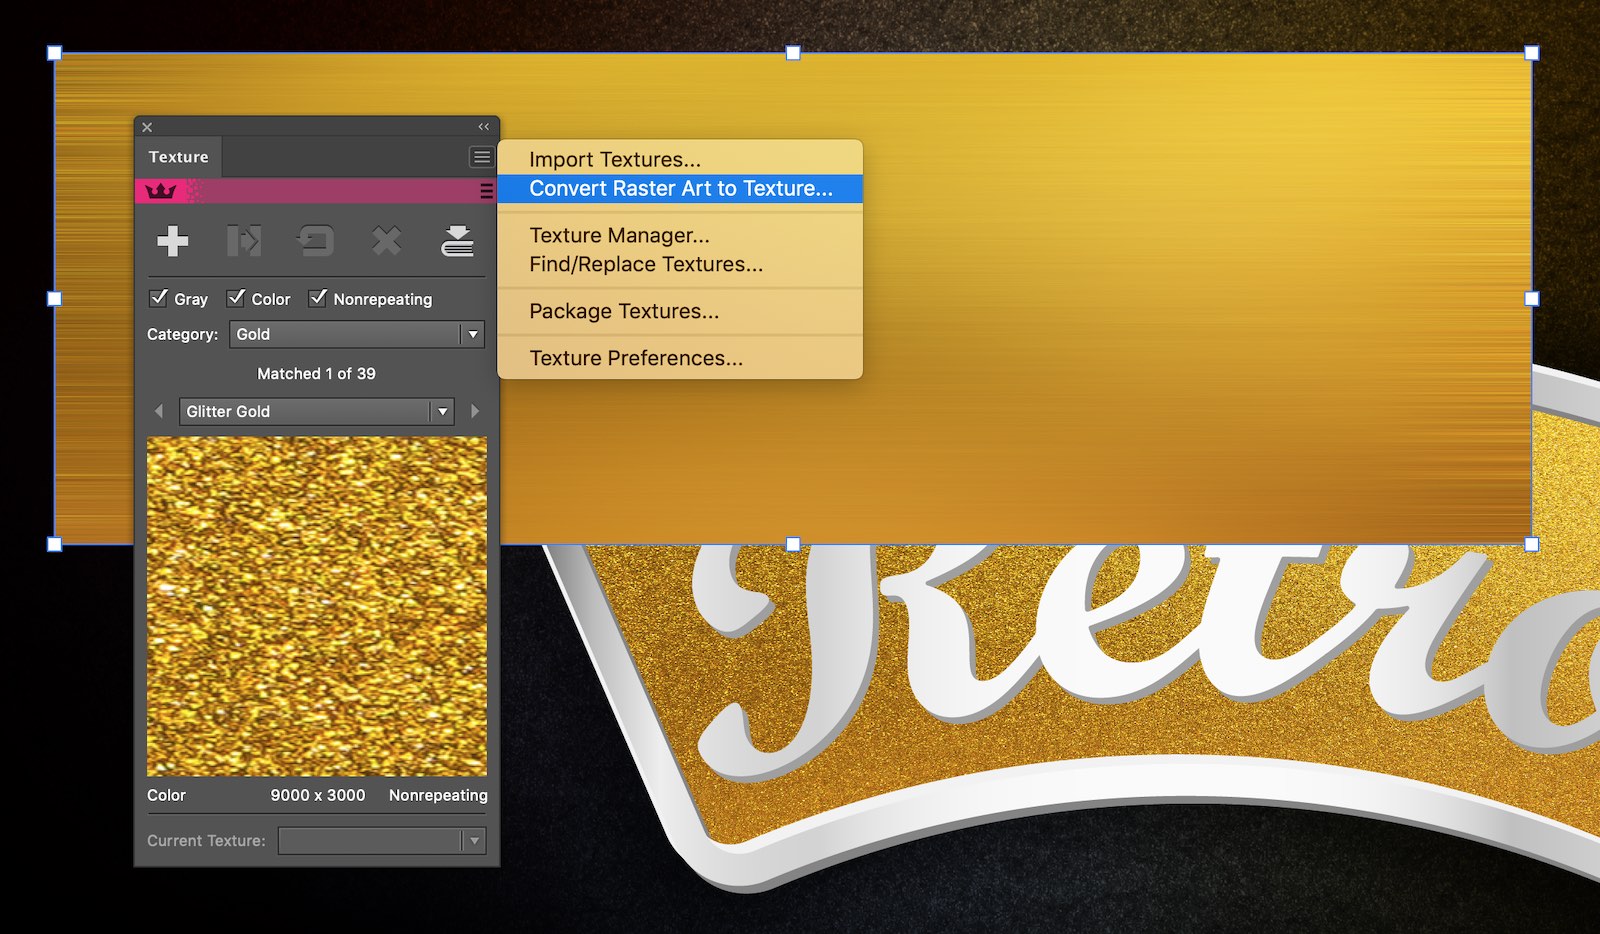 Import brushed gold texture into Texturino texture library